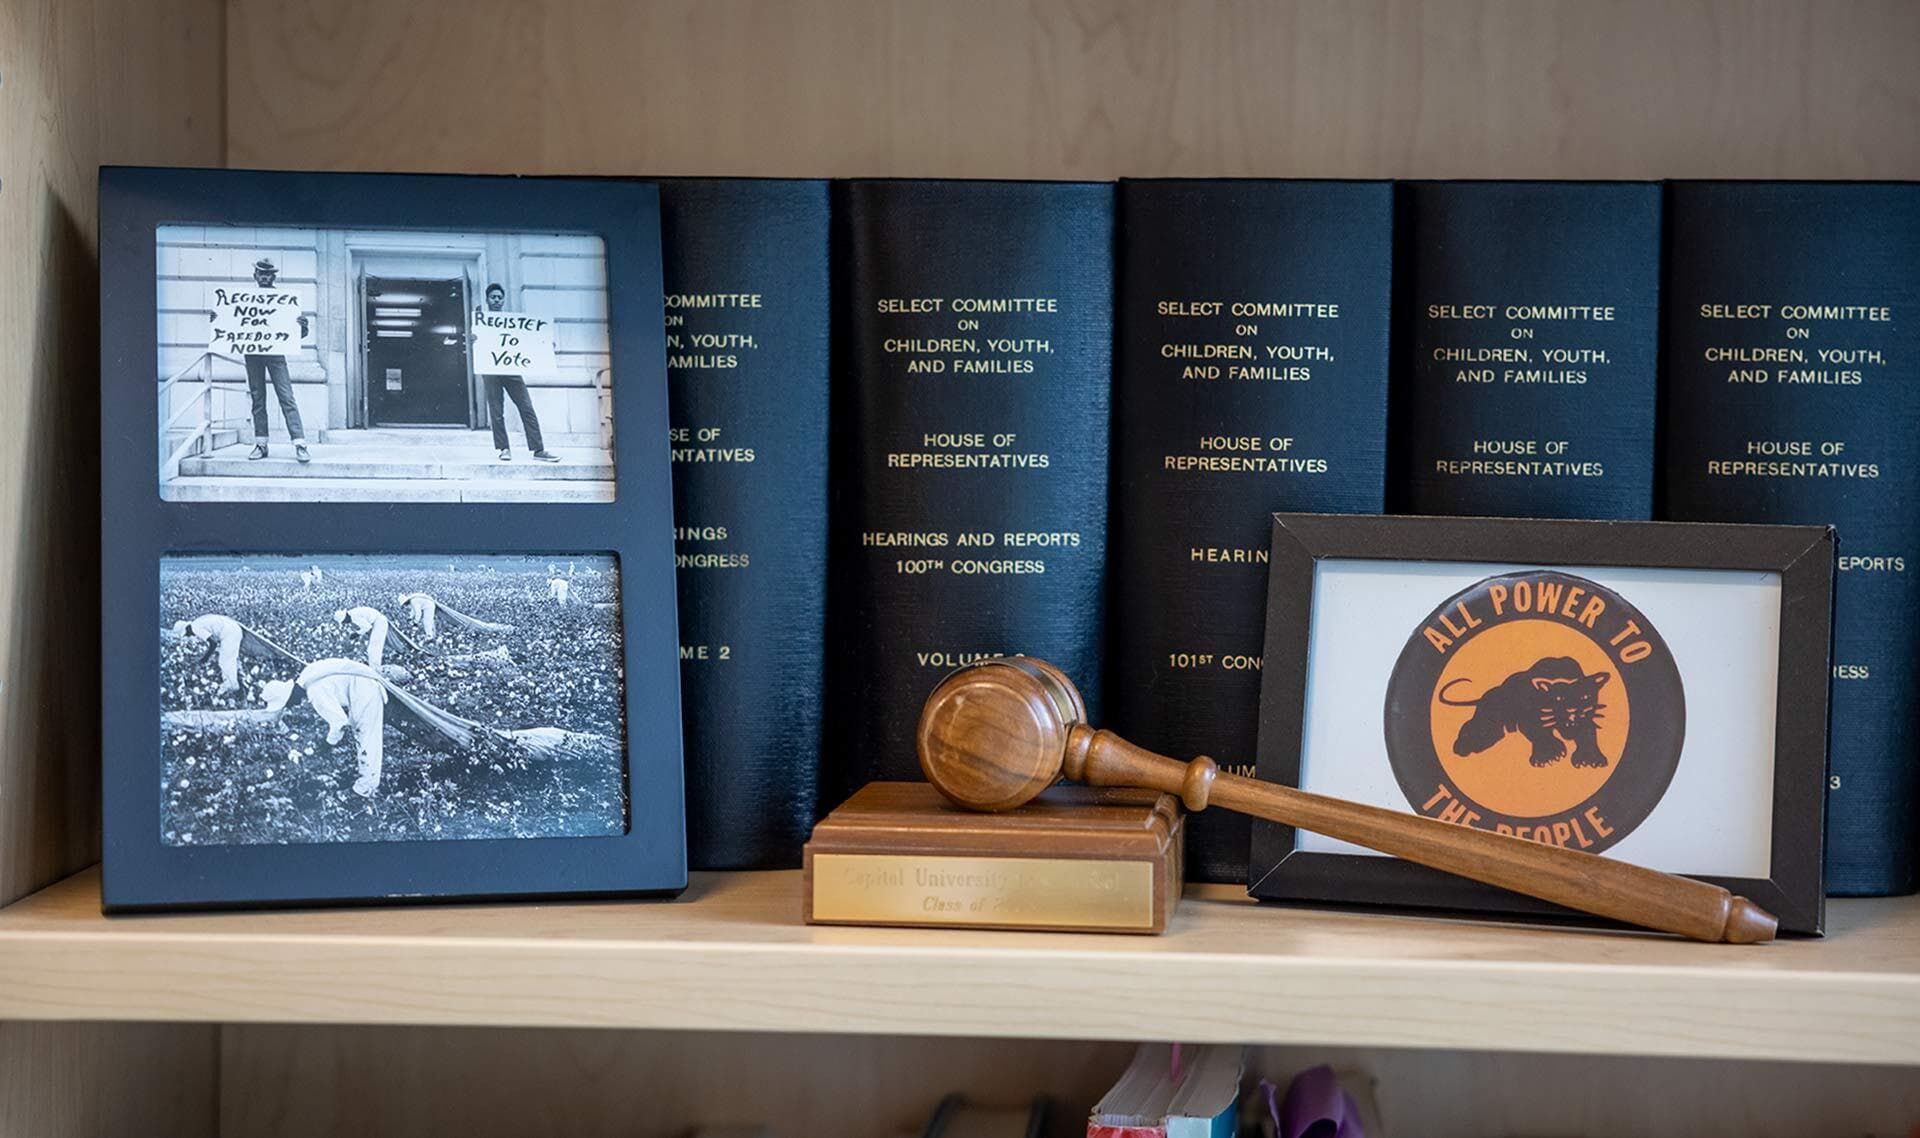 Framed black and white photos, thick black tomes of Congressional records, a wooden gavel and a postcard that says "All Power to the People"